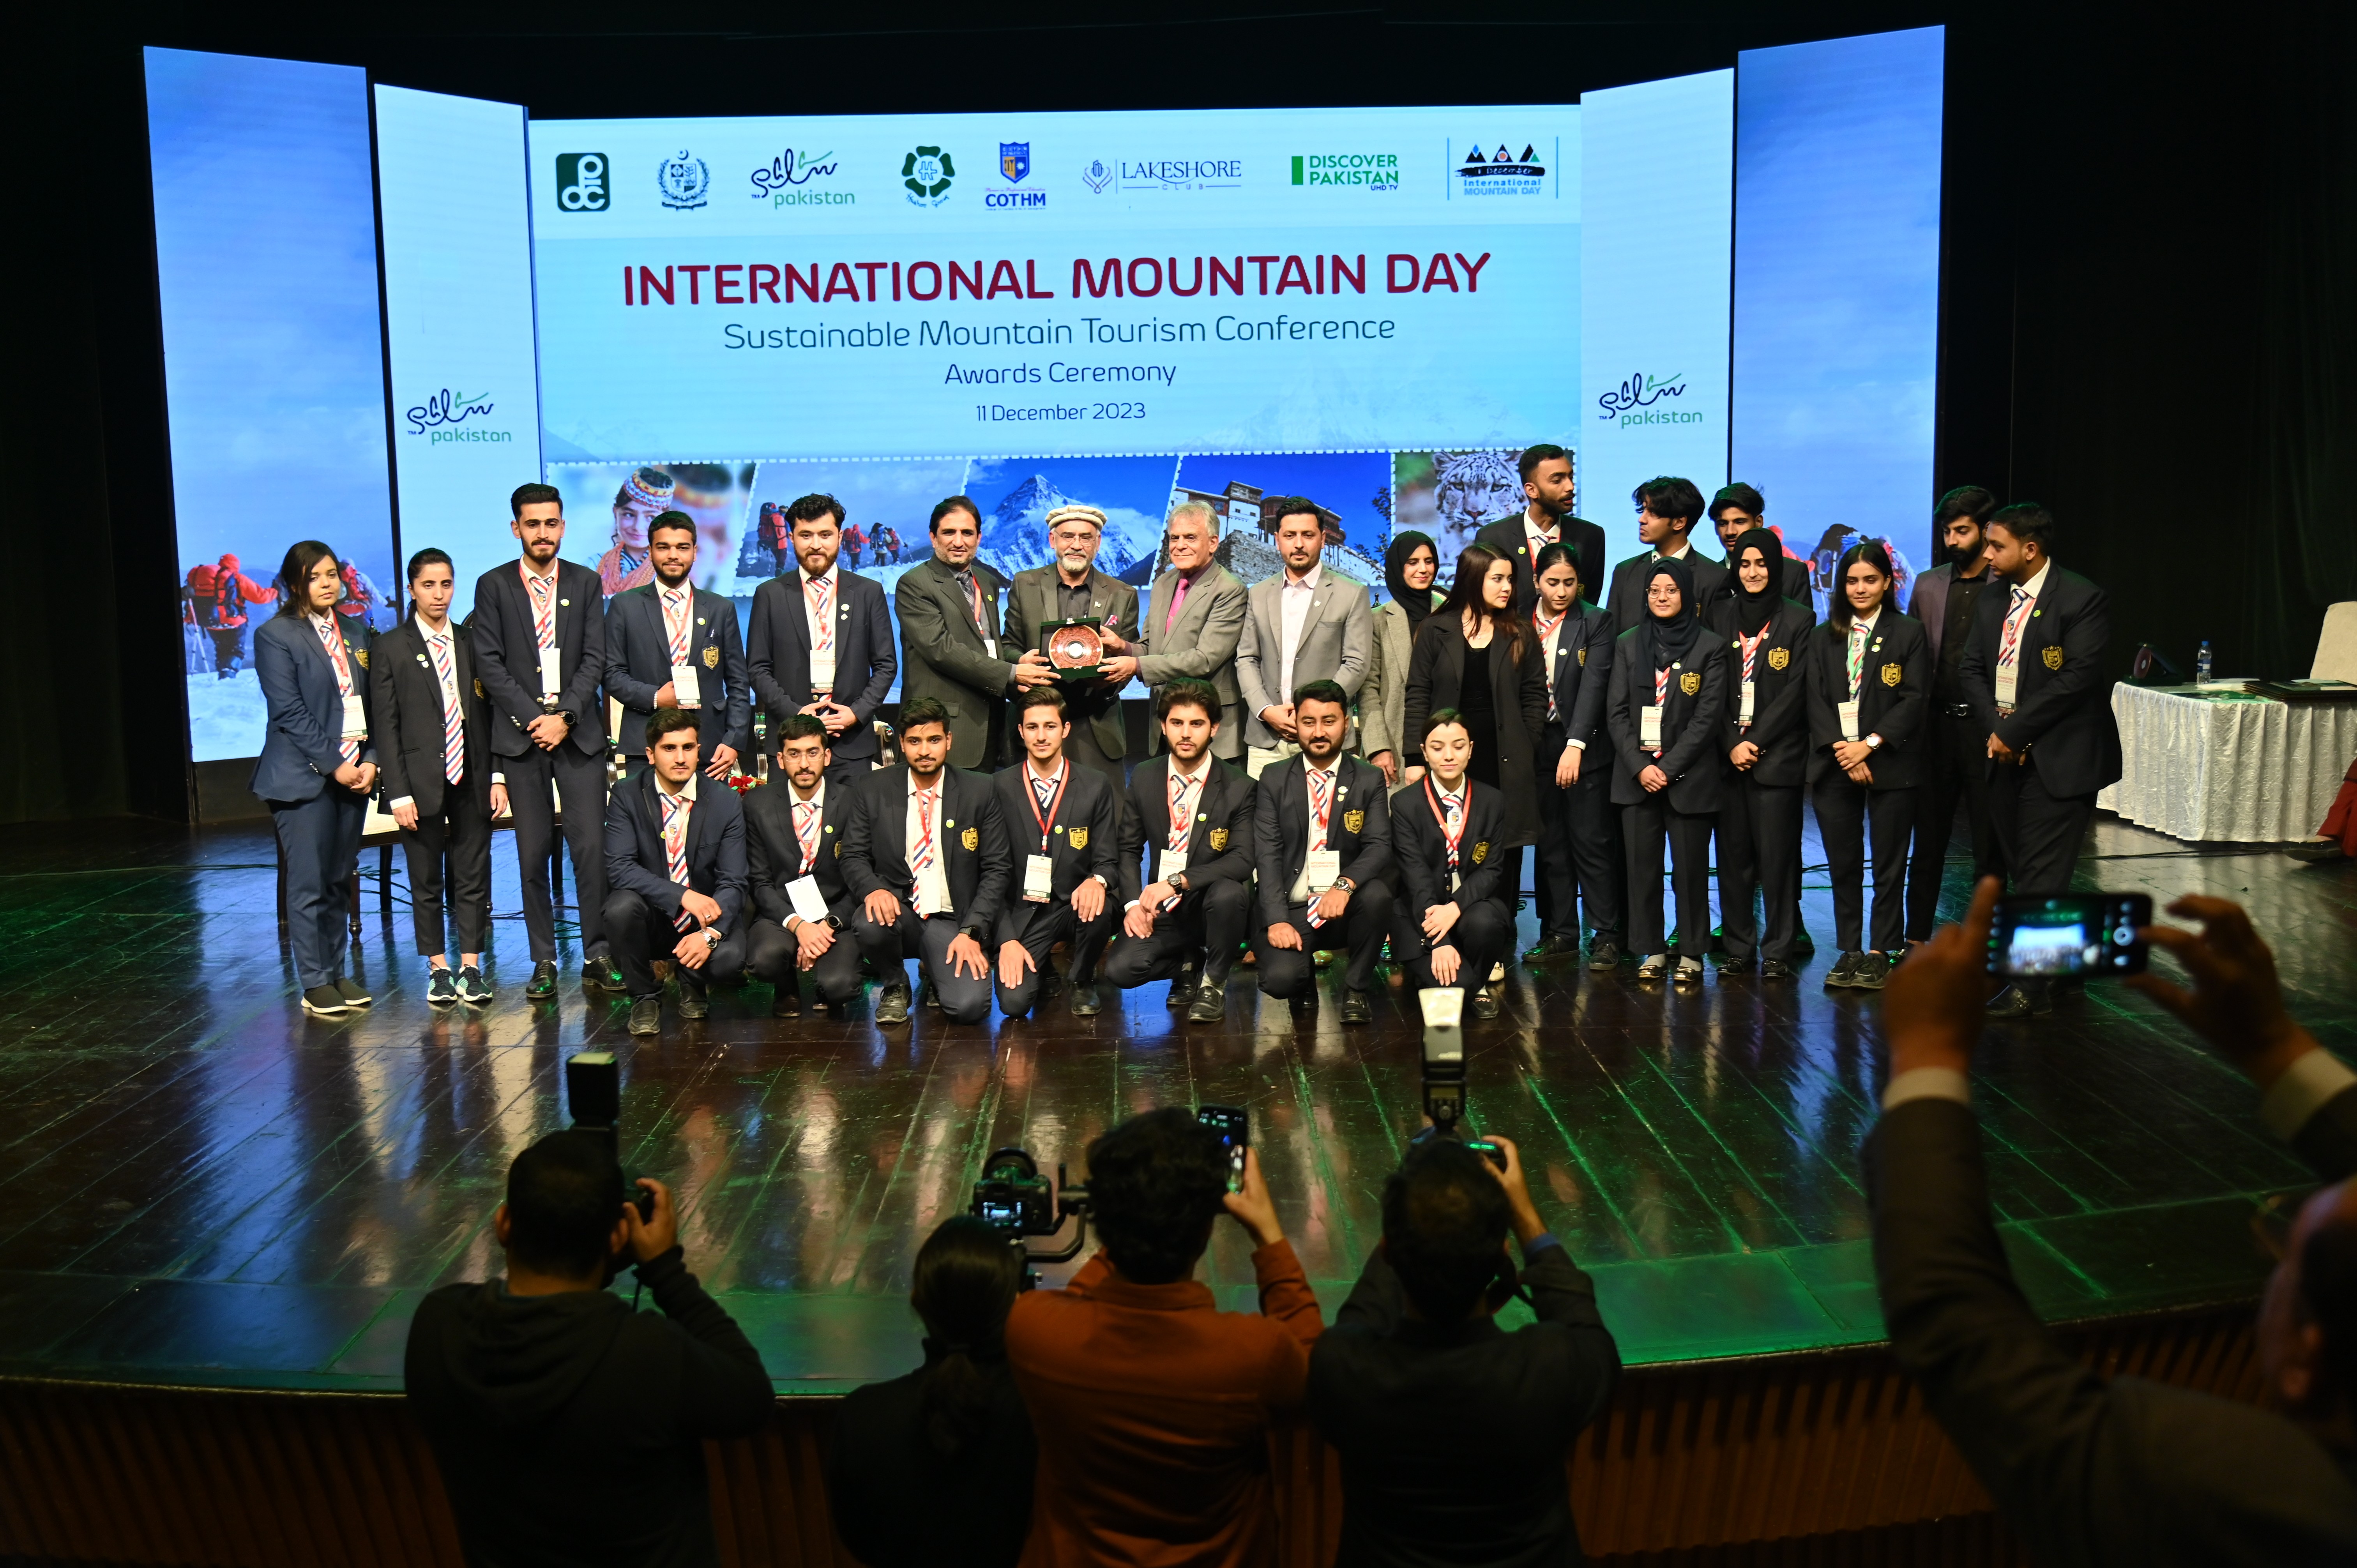 The group photo of the participants with the chief guests on International Mountain Day at PNCA